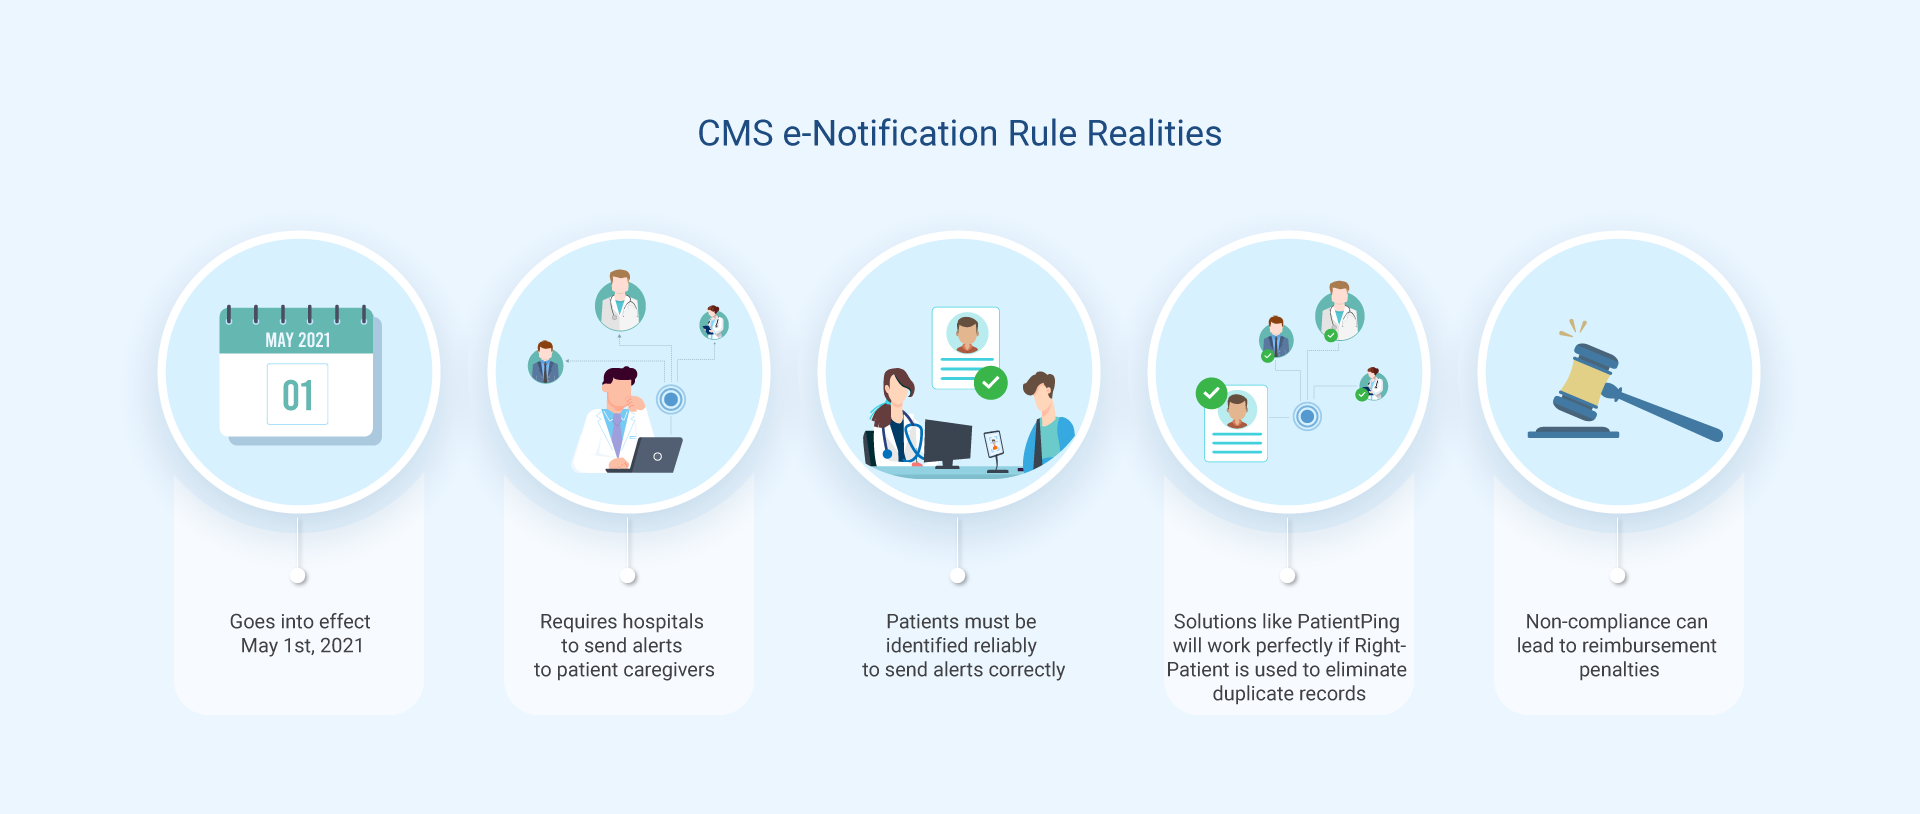 CMS-compliance-requires-accurate-patient-identification-RightPatient